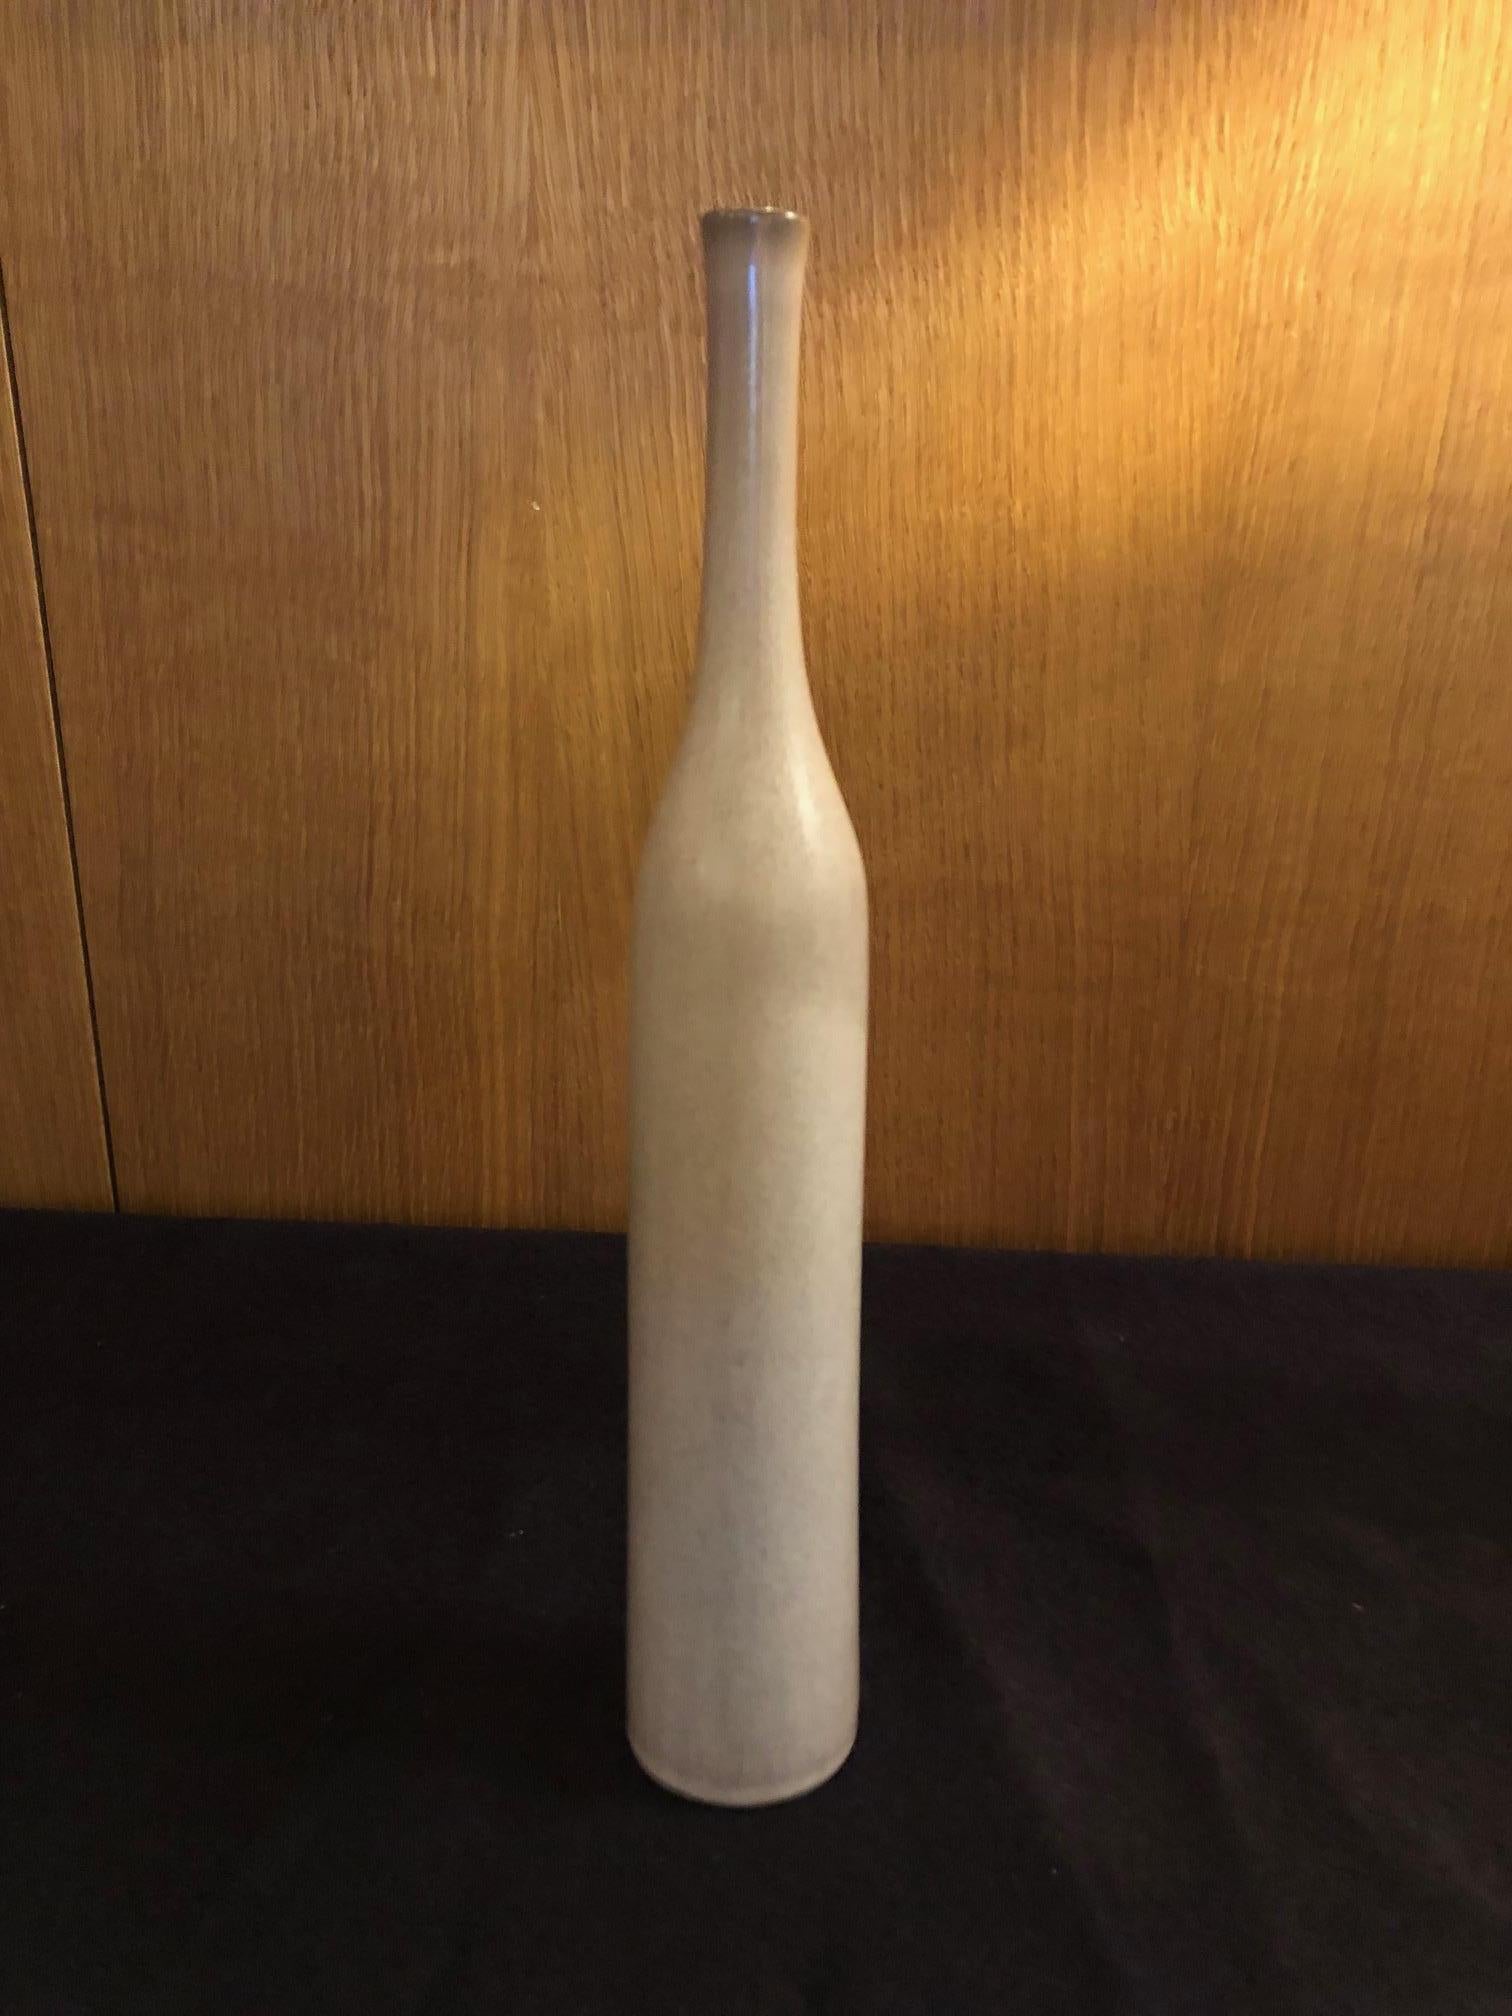 A bottle form vase by the French ceramic artists Jacques and Dani Ruelland. A mottled pinkish / white-grey glaze.